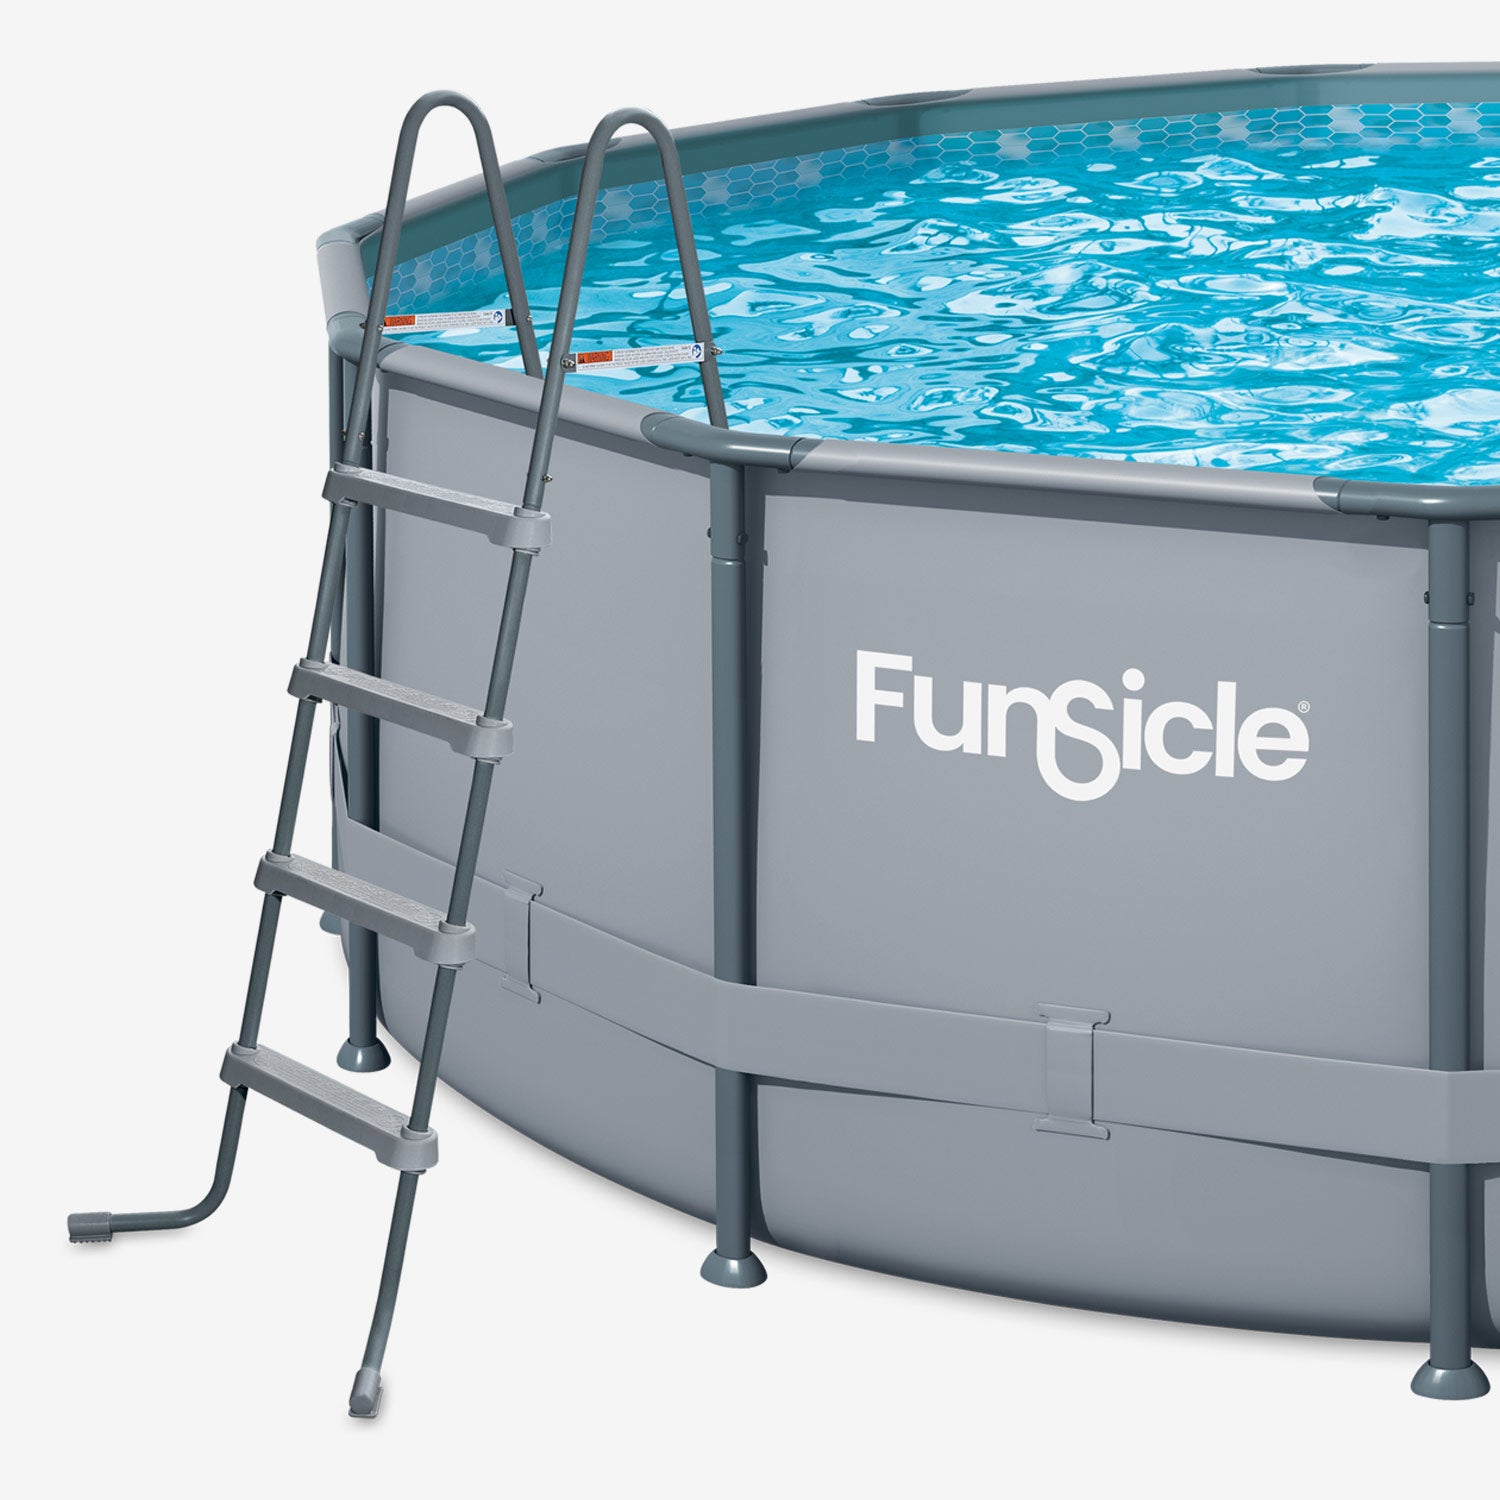 Funsicle 52" SureStep Ladder next to Funsicle Oasis Pool